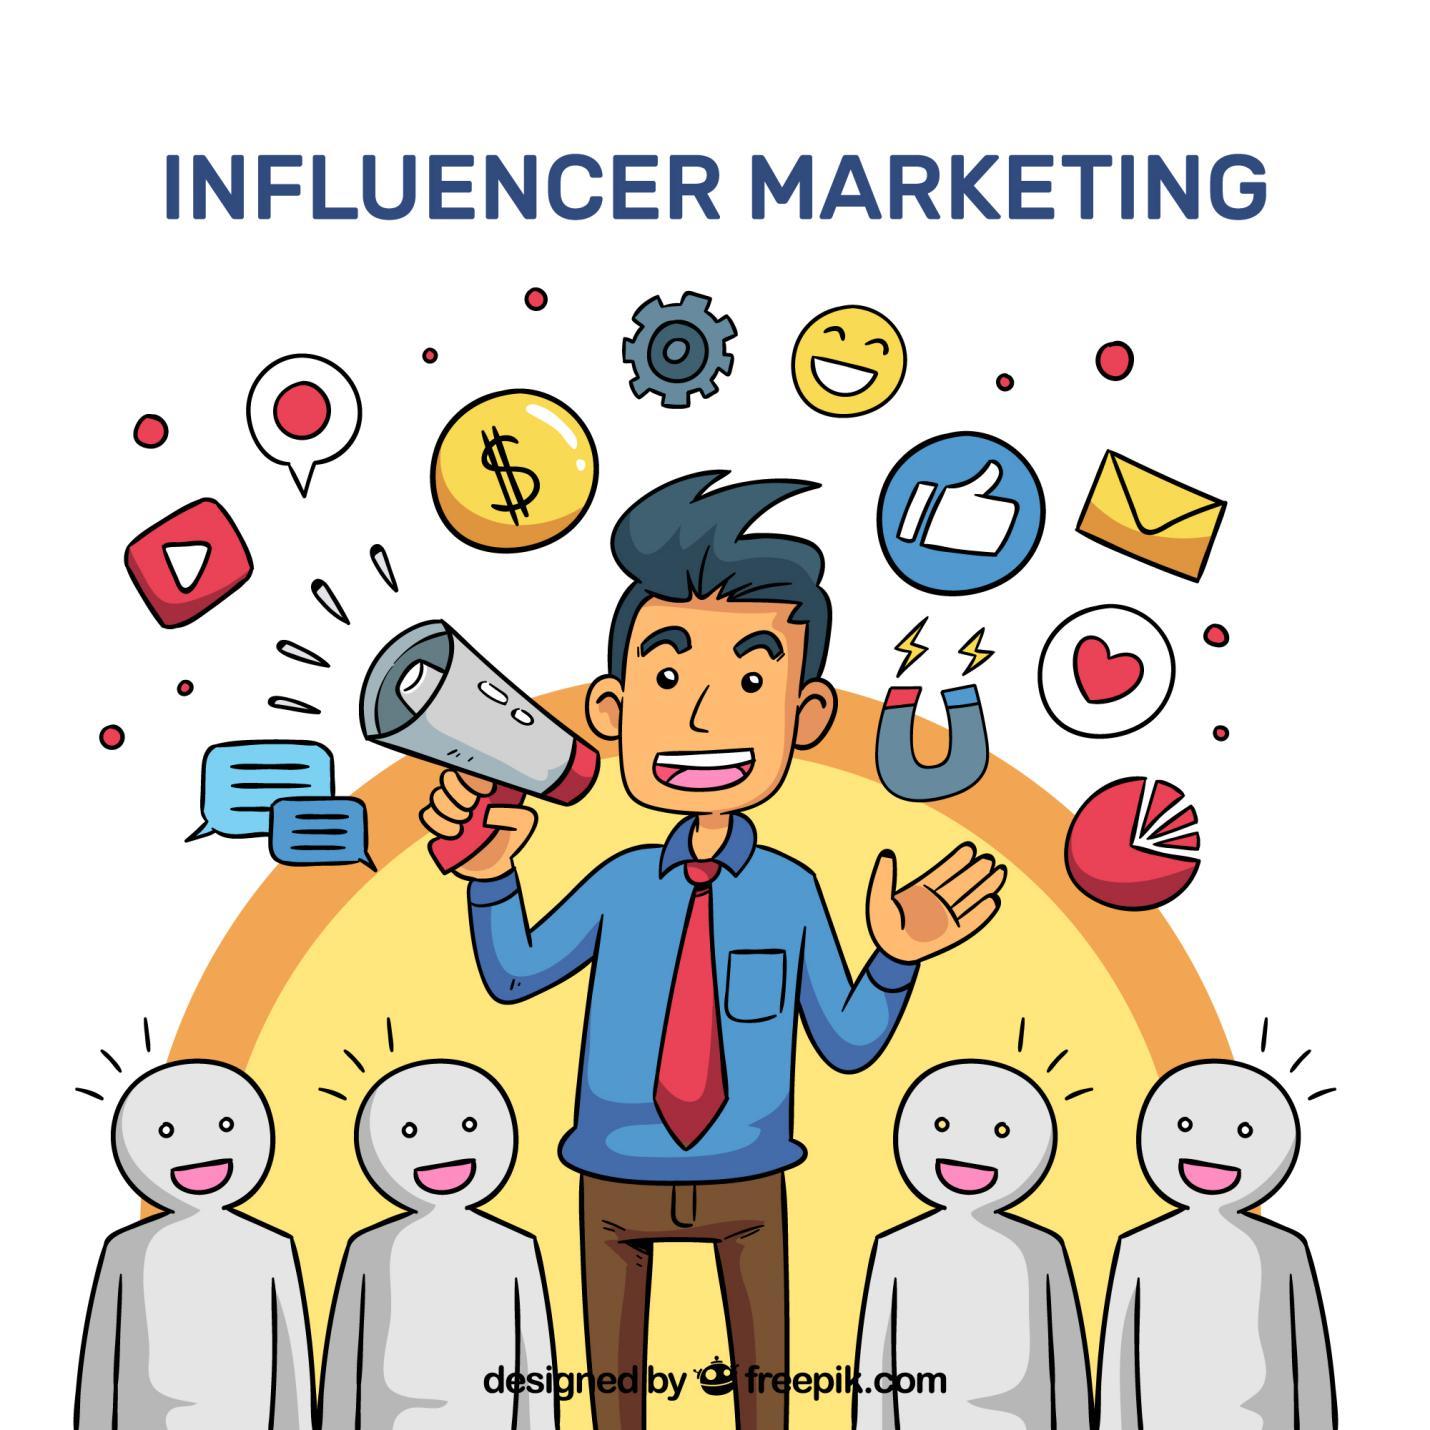 the urgent need for more research on influencer marketing